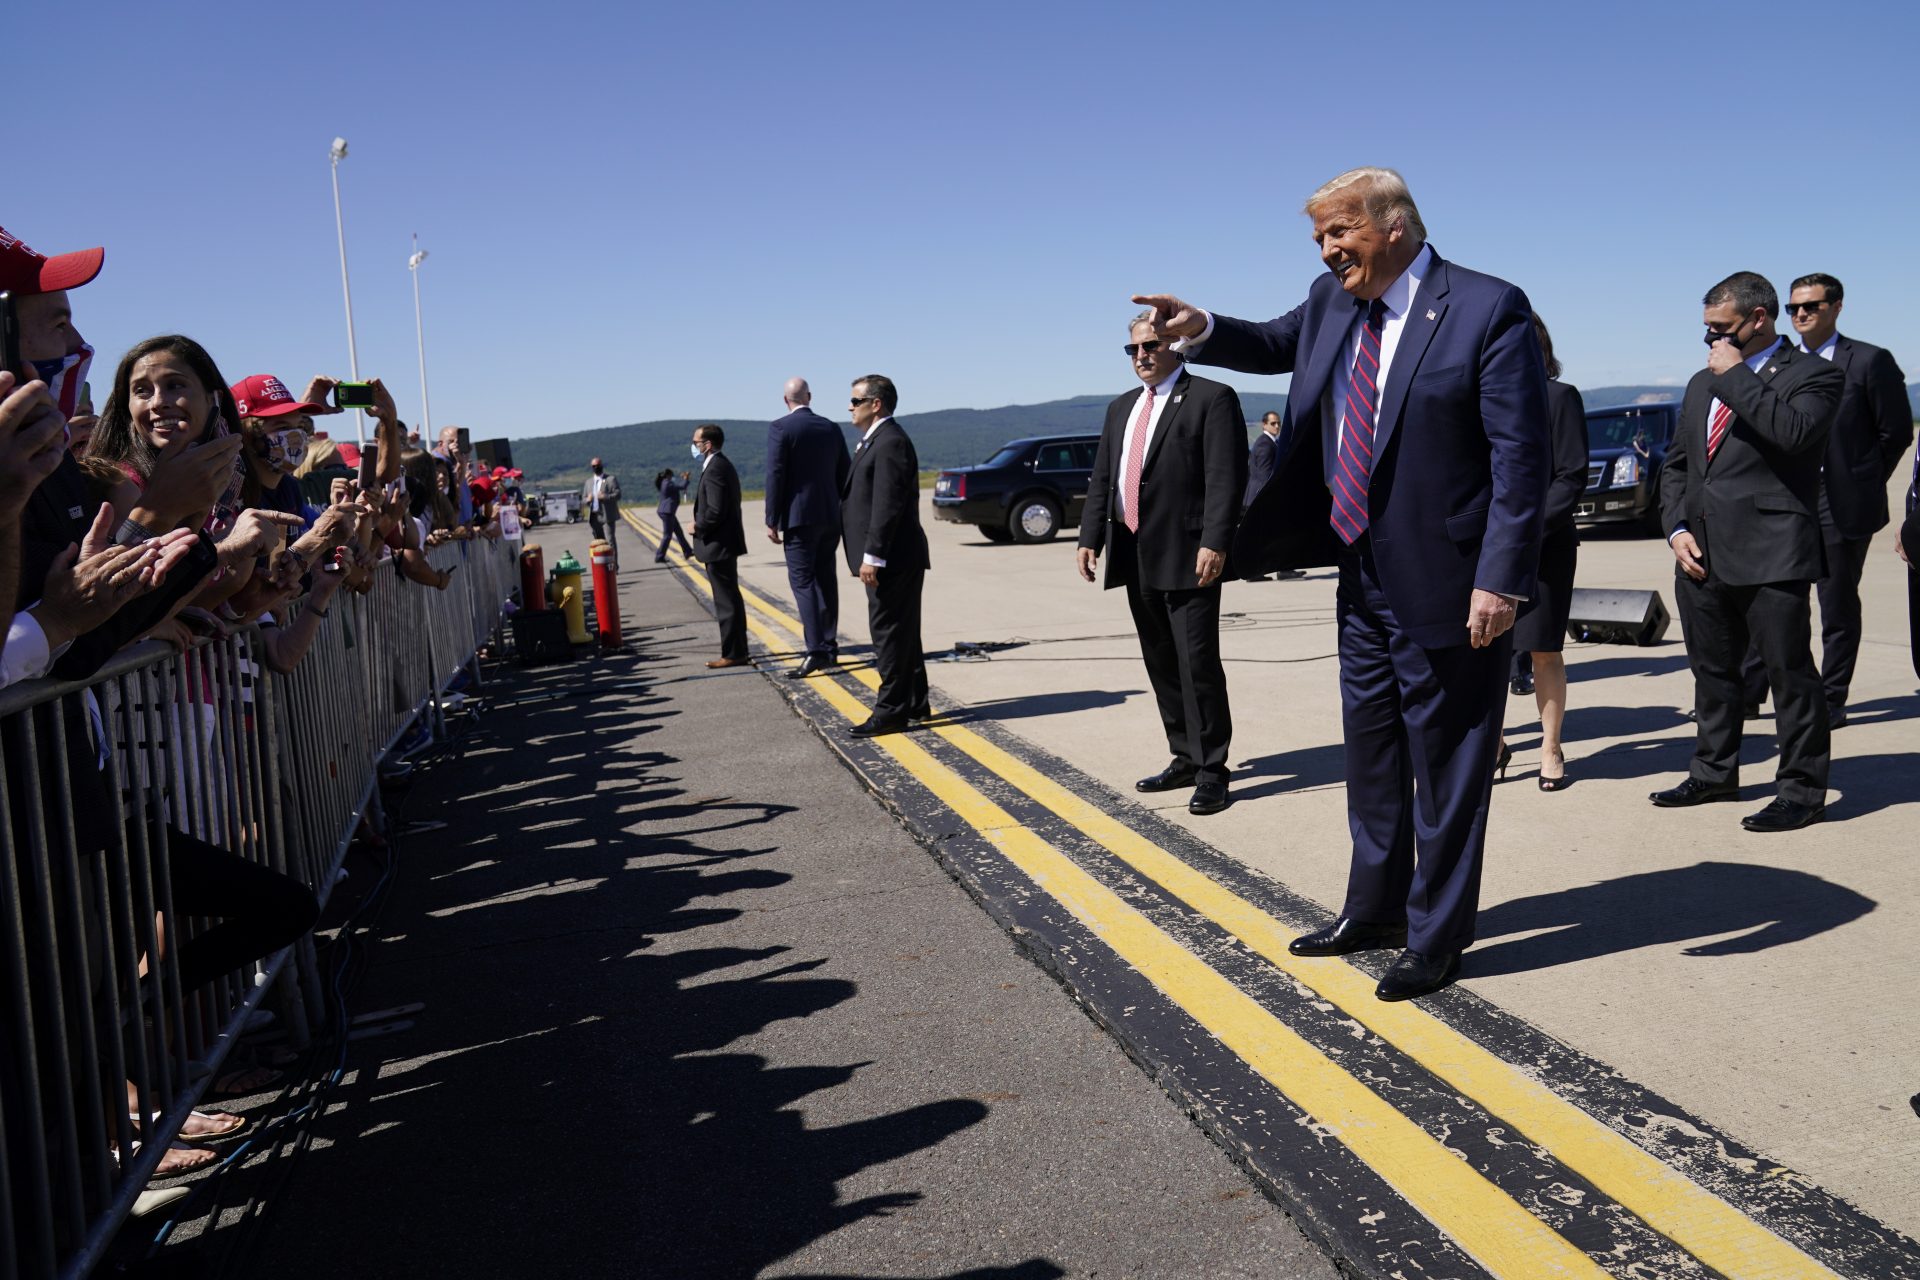 President Donald Trump greets supporters after arriving at at Wilkes-Barre Scranton International Airport, Thursday, Aug. 20, 2020, in Avoca, Pa.